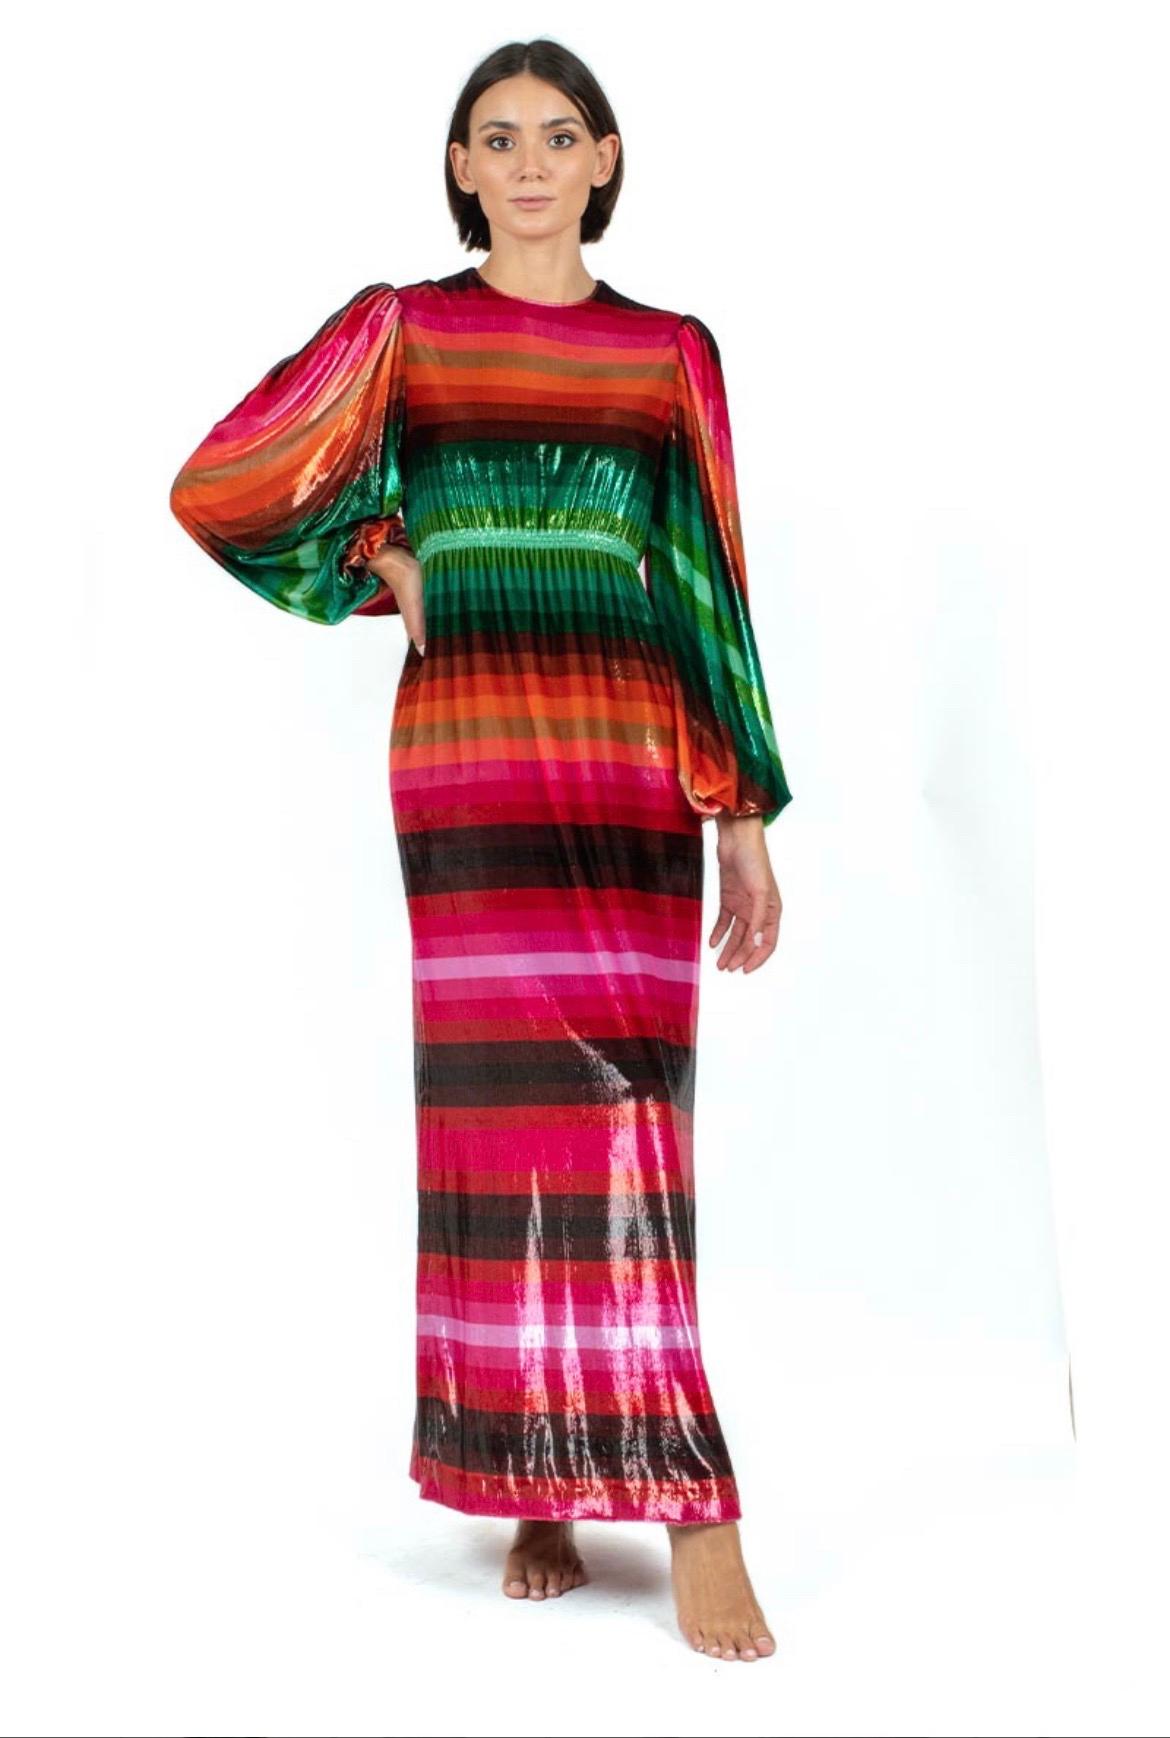 Rainbow dress by Valentino Garavani made of light velvet with lurex threads, from the S/S 2019 collection.
New with tag.